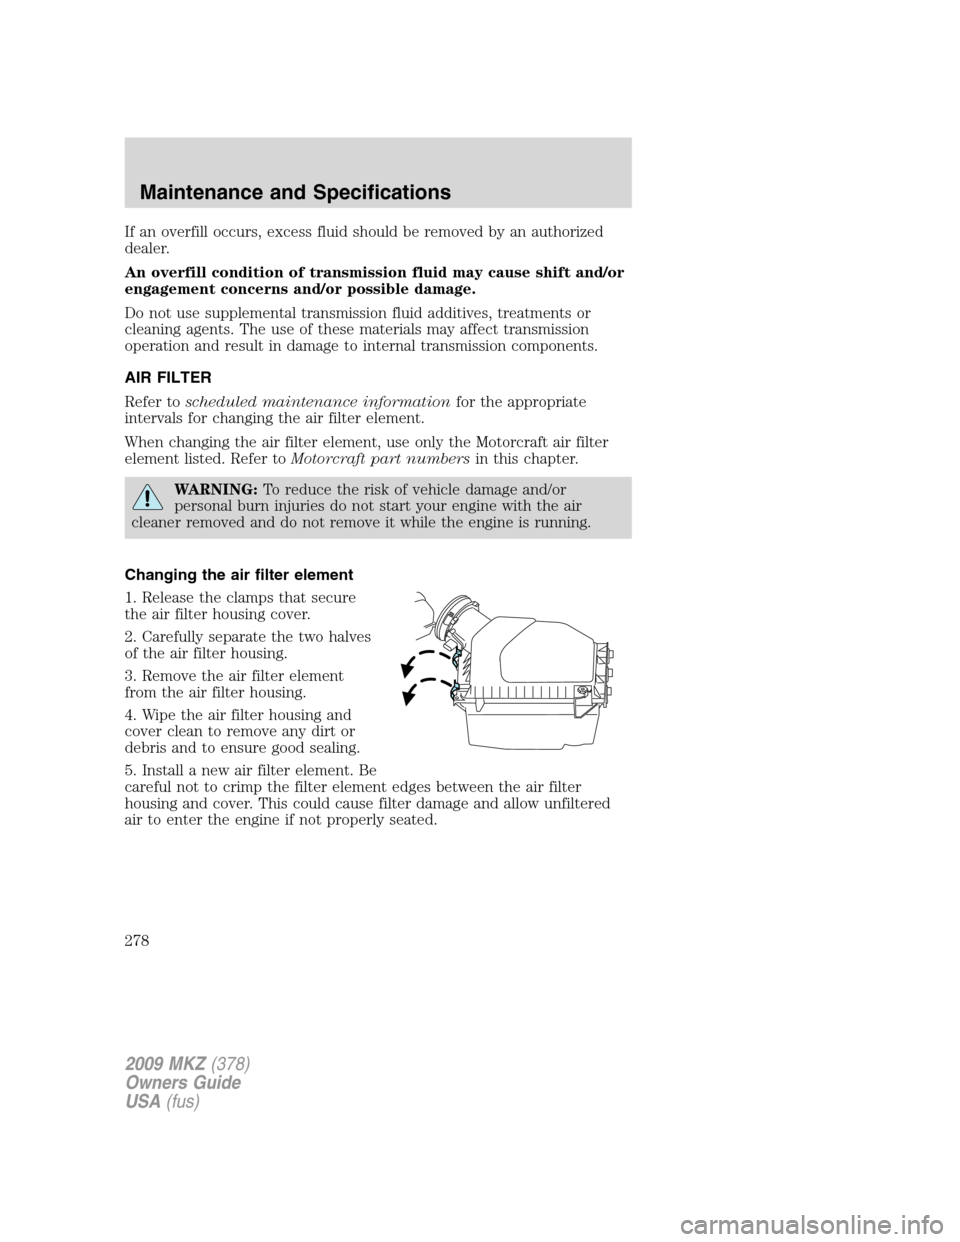 LINCOLN MKZ 2009  Owners Manual If an overfill occurs, excess fluid should be removed by an authorized
dealer.
An overfill condition of transmission fluid may cause shift and/or
engagement concerns and/or possible damage.
Do not use